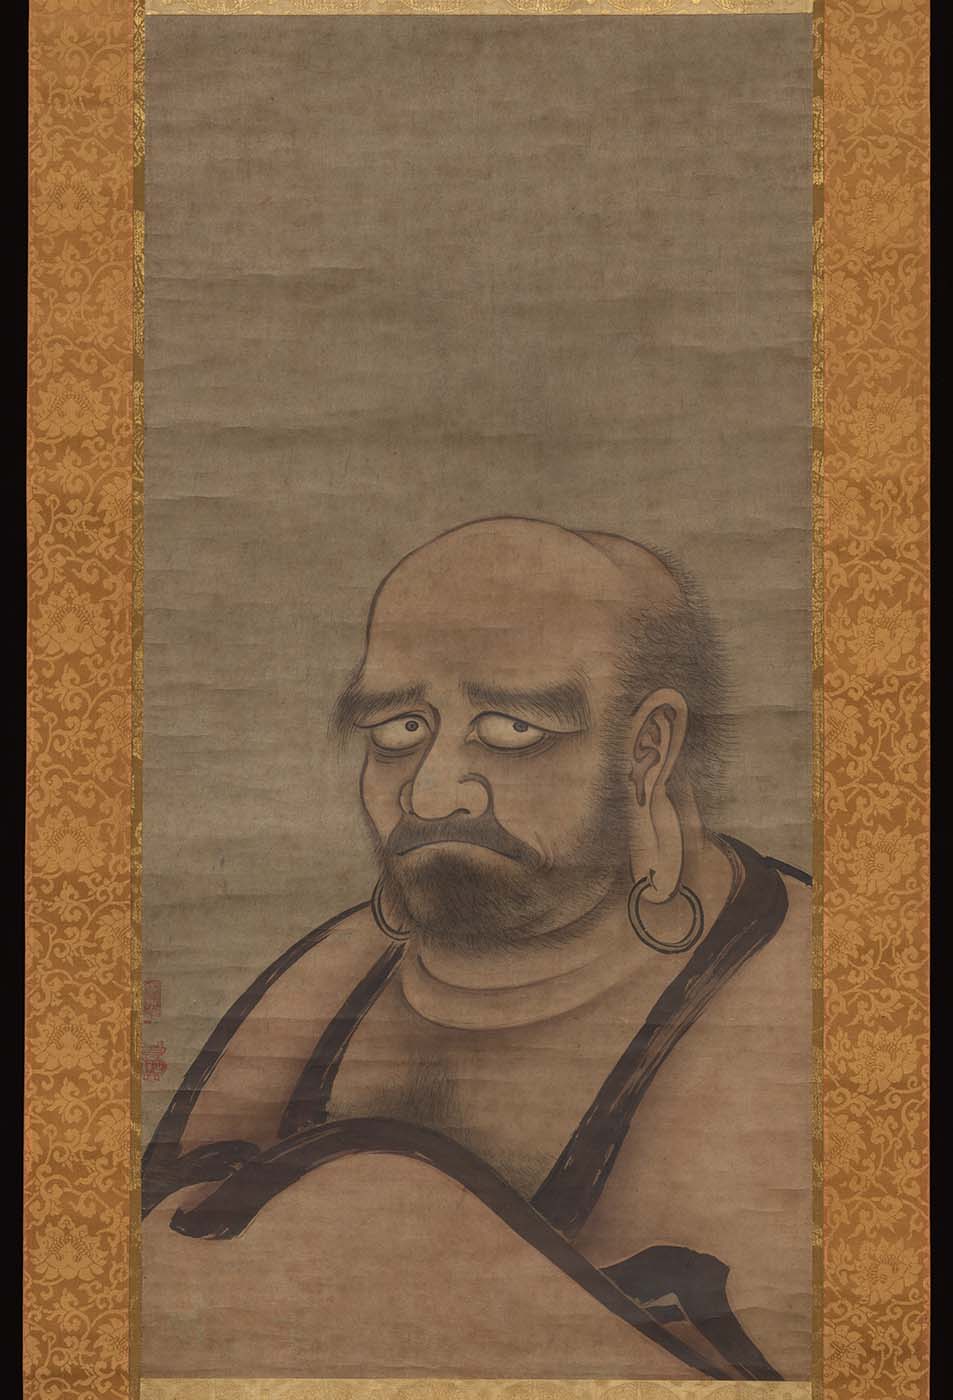 Photograph of painting by Kano Masanobu (ca. 1434– ca. 1530), Bodhidharma in Red Robes, Japan, Muromachi period (1392– 1573), late 15th century. Hanging scroll; ink and color on paper. Image: 35 ⅞ × 17 ⅝ in. (91.2 × 44.8 cm). Purchase, Mary Livingston Griggs and Mary Griggs Burke Foundation and The Miriam and Ira D. Wallach Foundation Funds, and The Vincent Astor Foundation Gift, 2022 (2022.47)